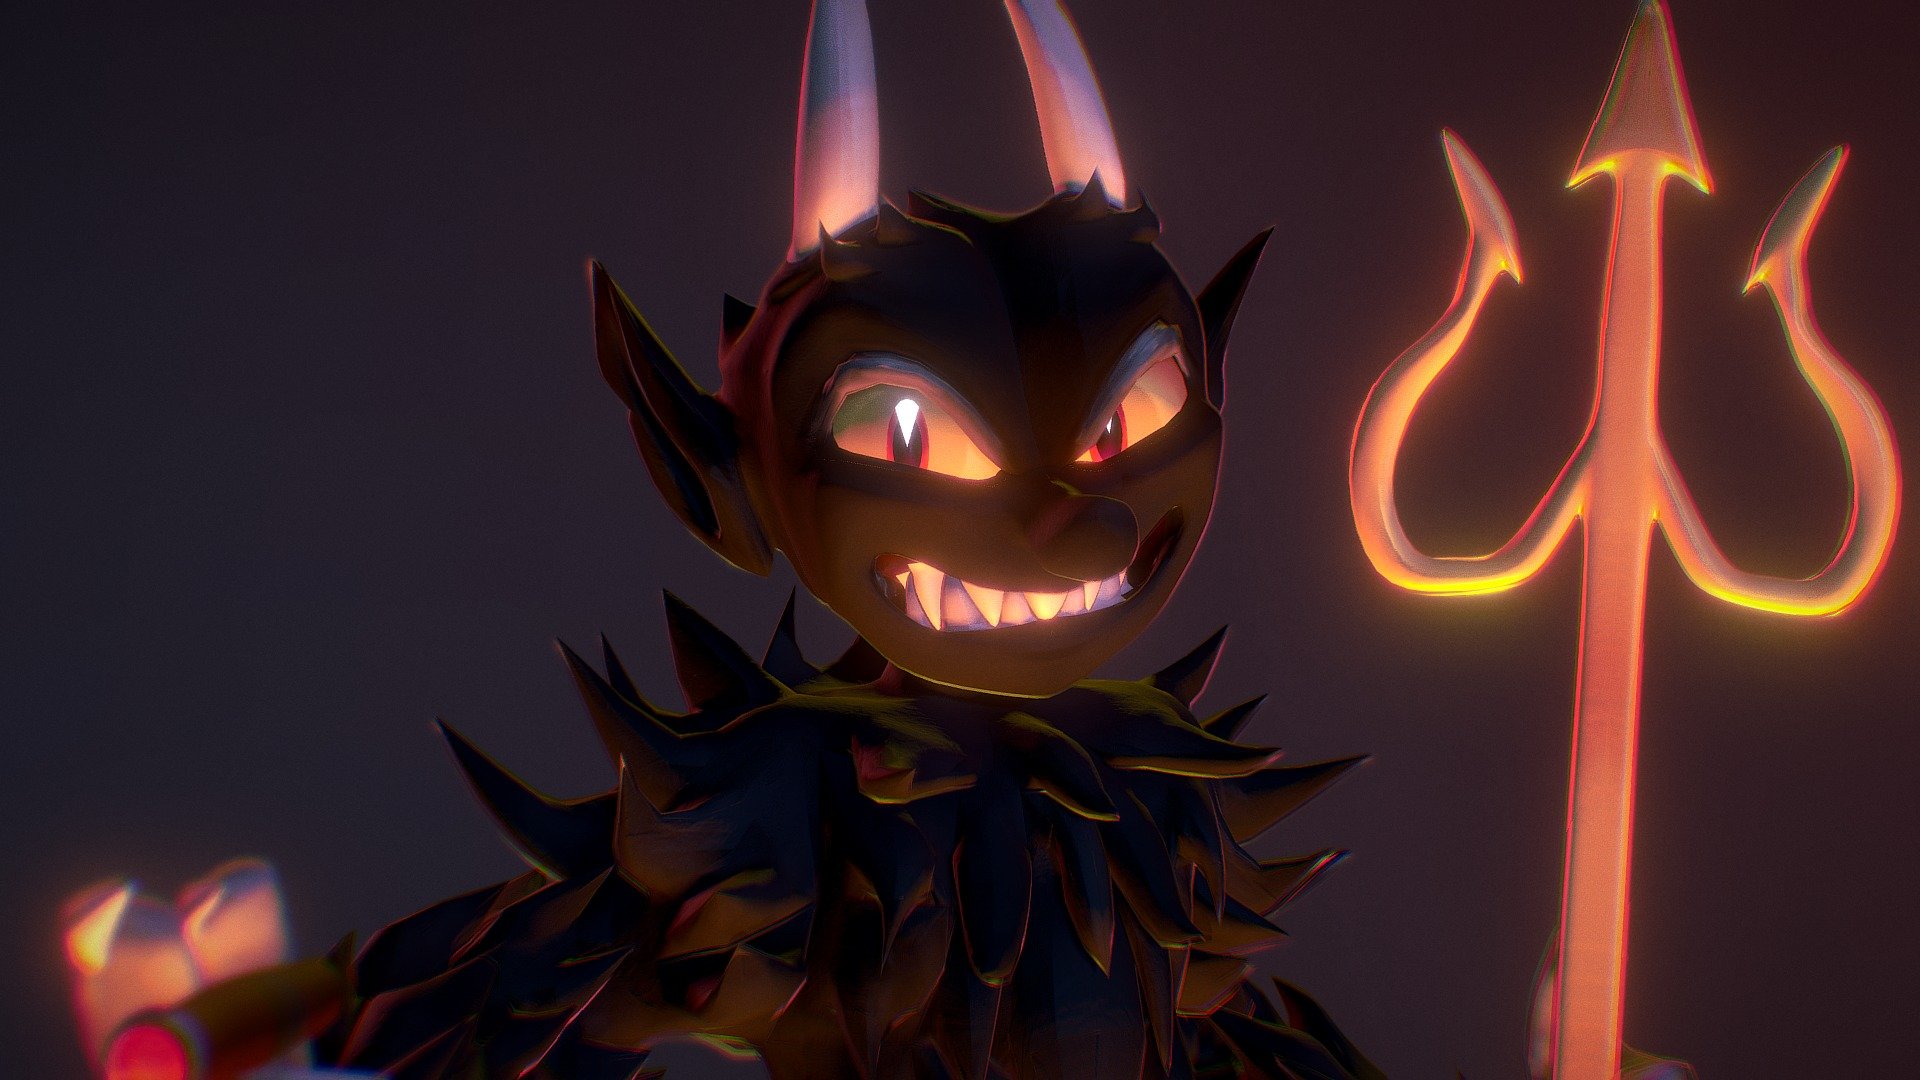 My fan art with the Devil from Cuphead game 3d model